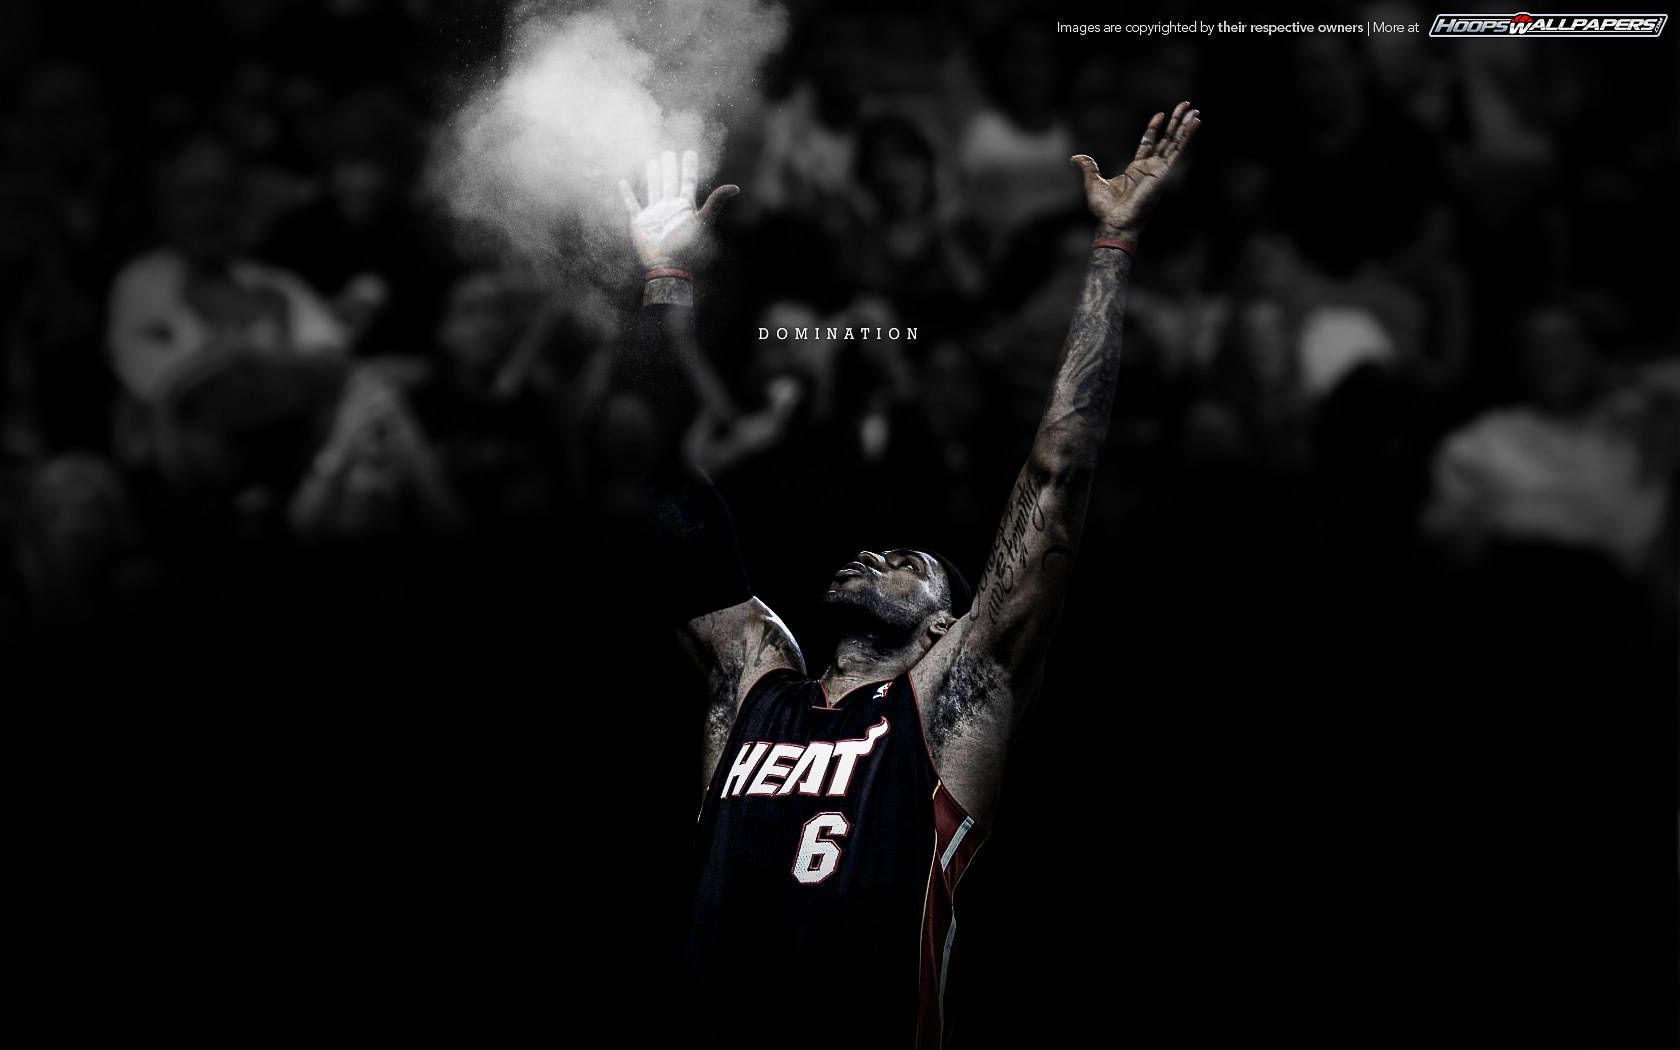 Lebron james wallpaper 2012 1920x1200 download free amazing backgrounds for desktop and mobile devices - Lebron James